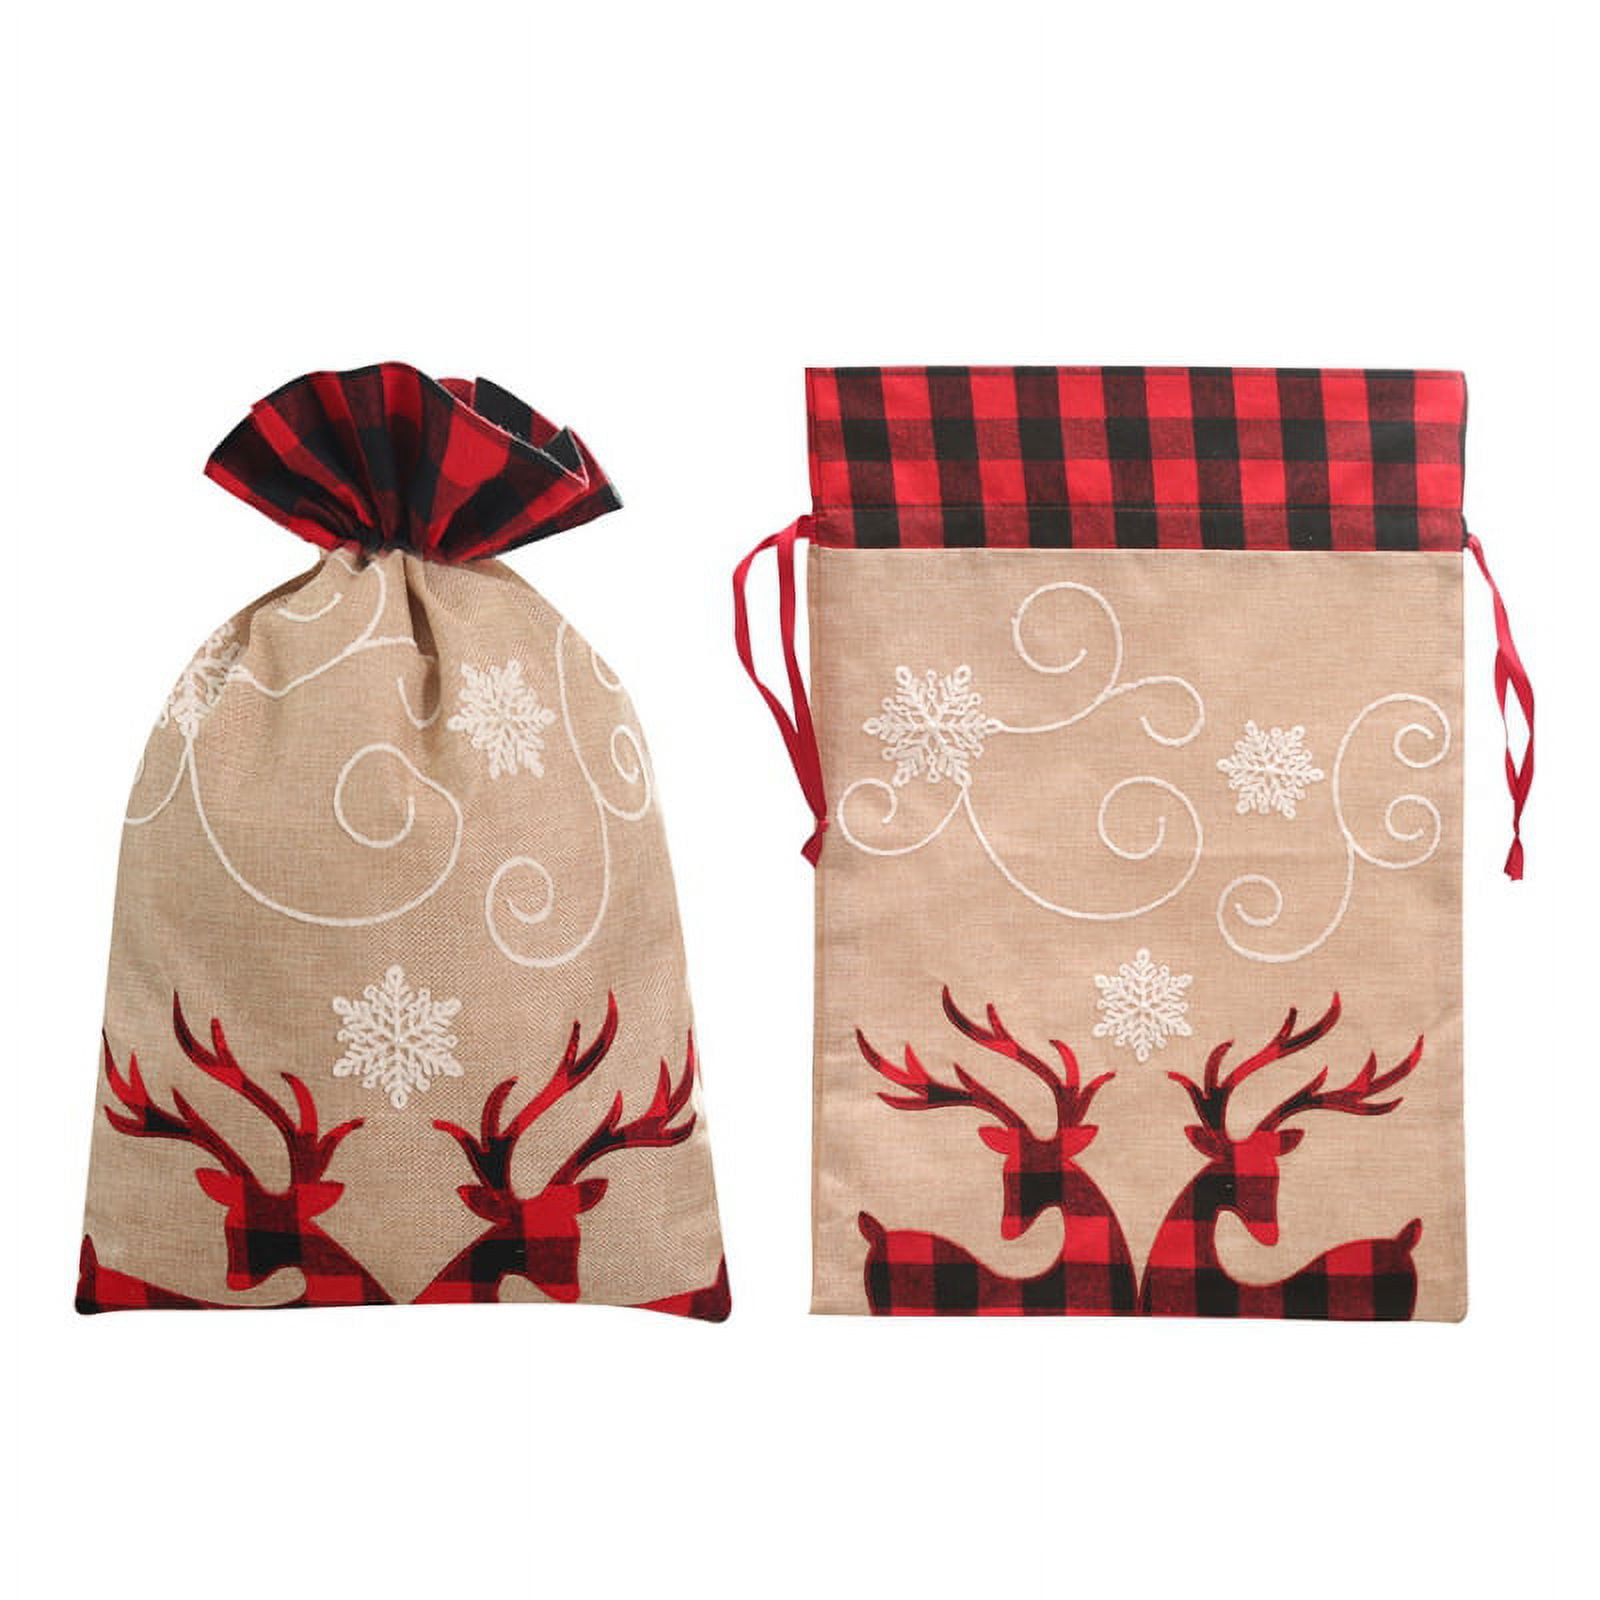 16 Pack Christmas Gift Bags Kraft Holiday Gifts Bags with Festive Prints,  6.3 x 3.2 x 8.7 inches Sturdy Christmas Goodie bags with Handle, for Gifts